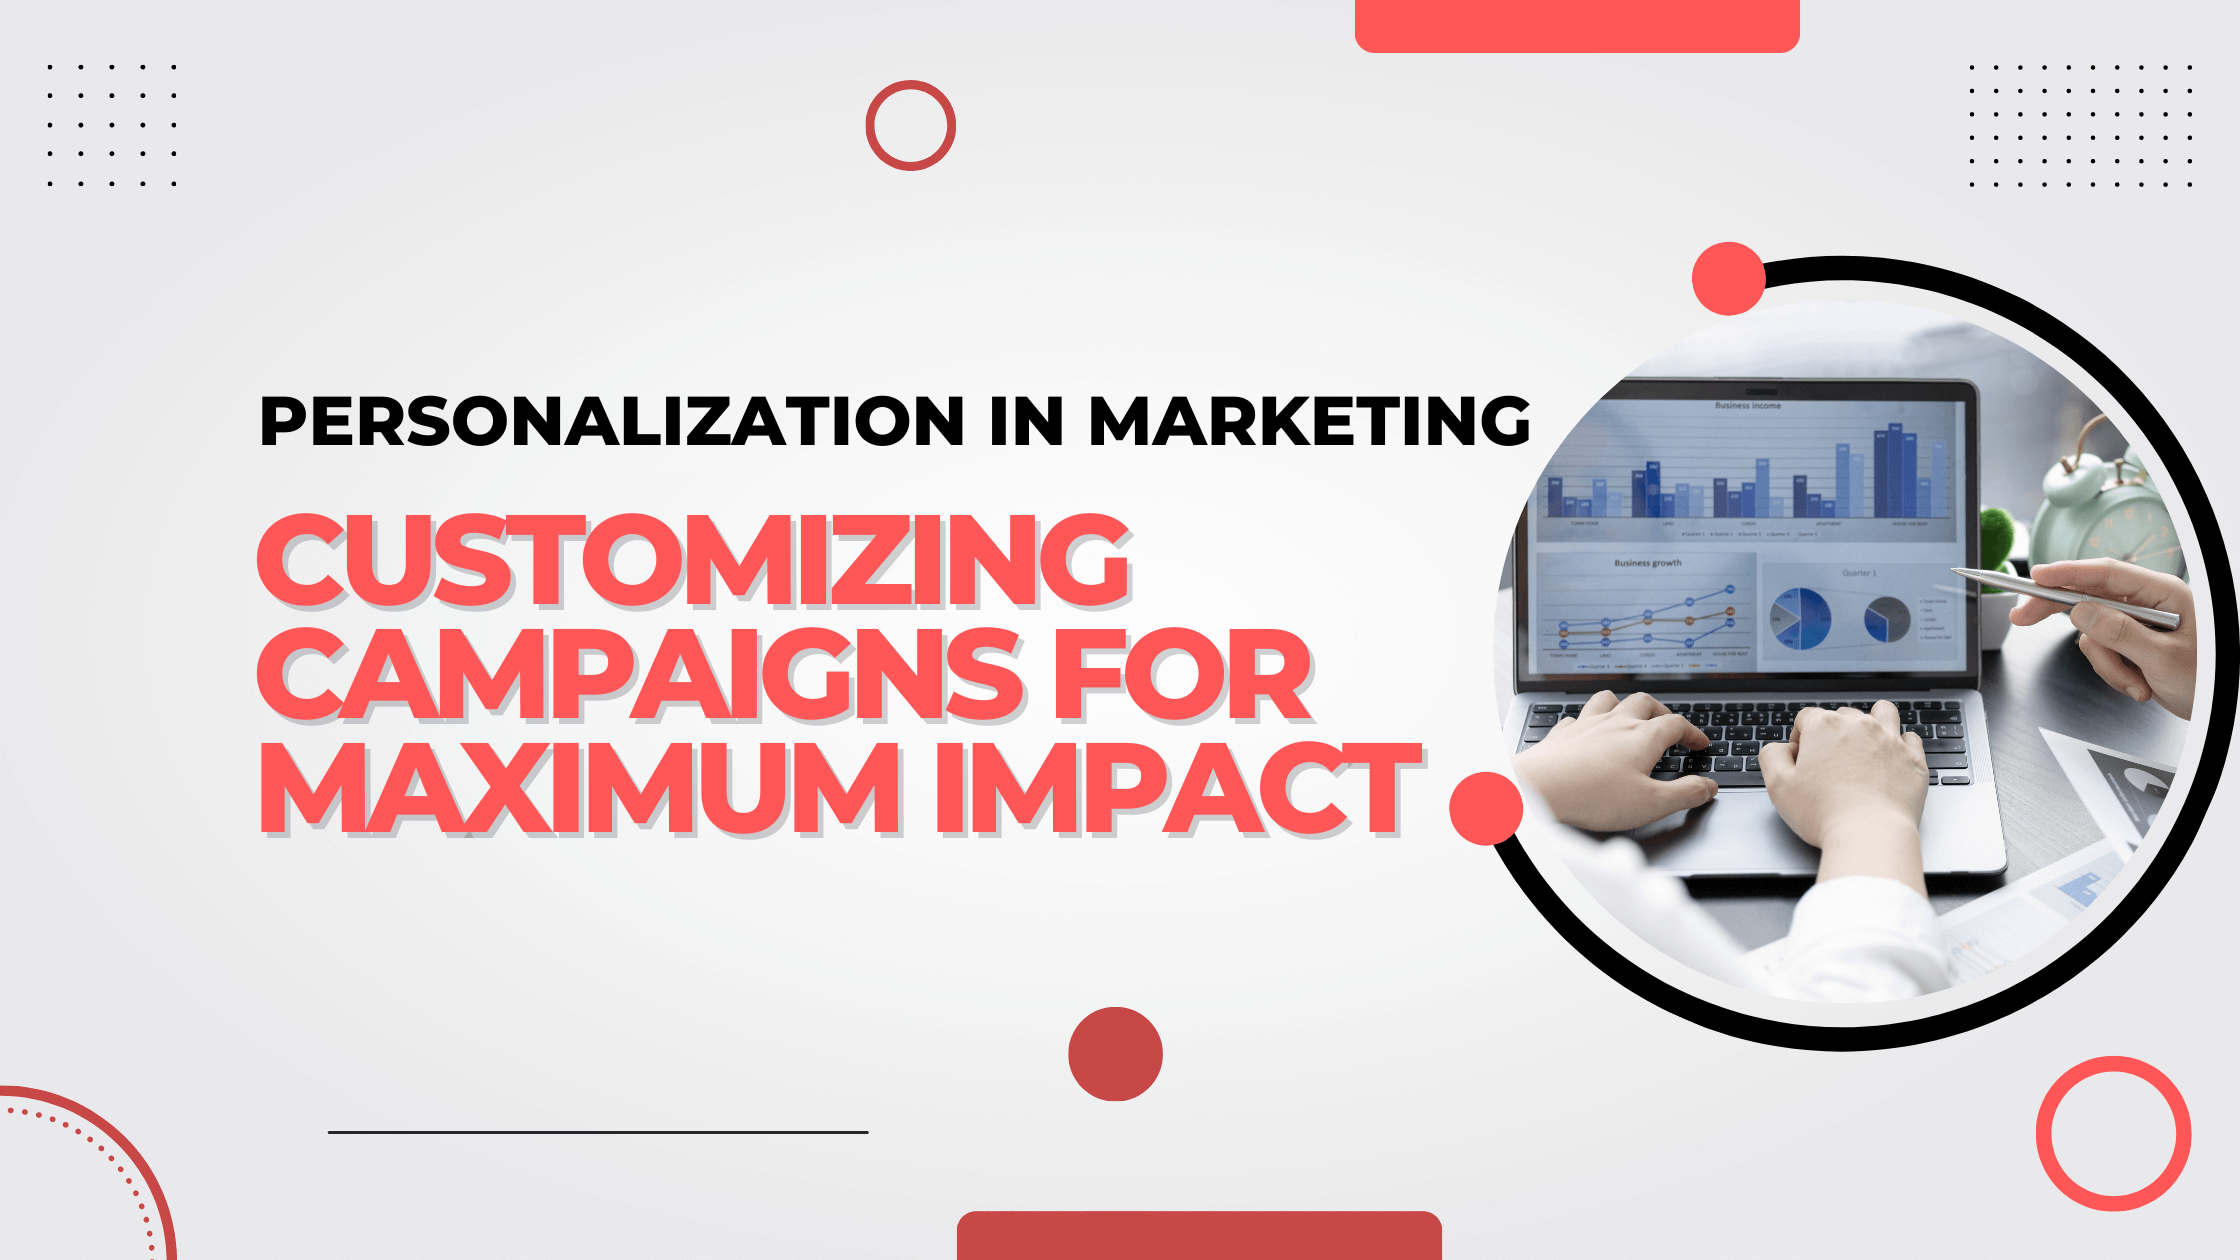 Personalization in Marketing: Customizing Campaigns for Maximum Impact